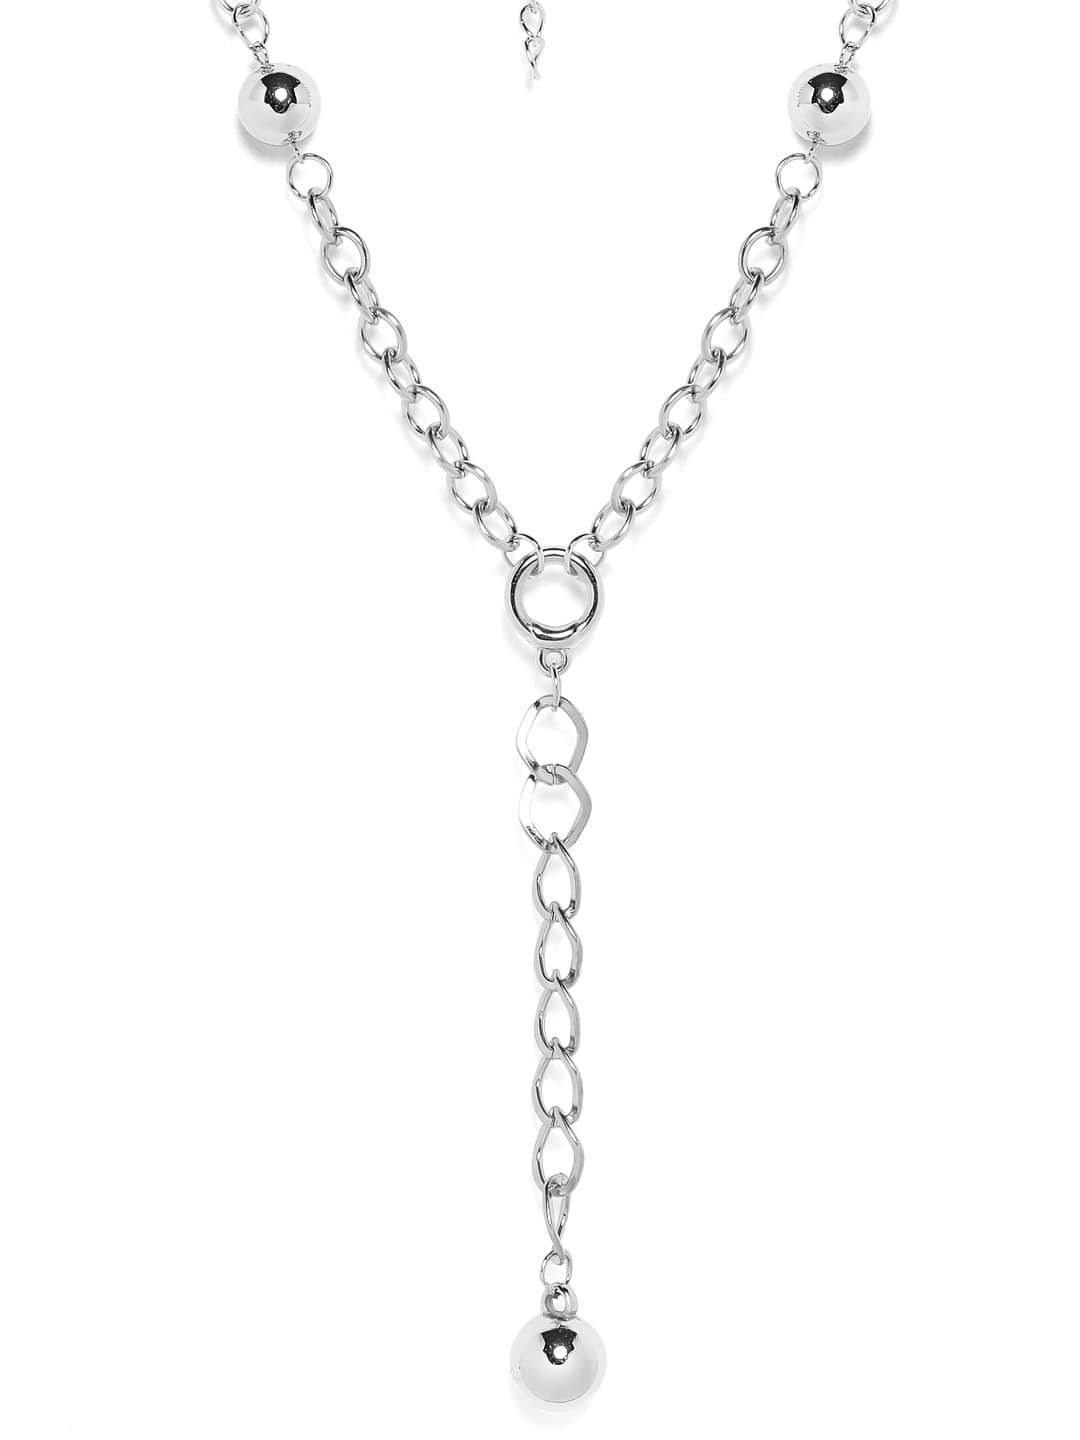 Rubans Silver Plated Handcrafted Interlinked Chain Necklace Chain & Necklaces